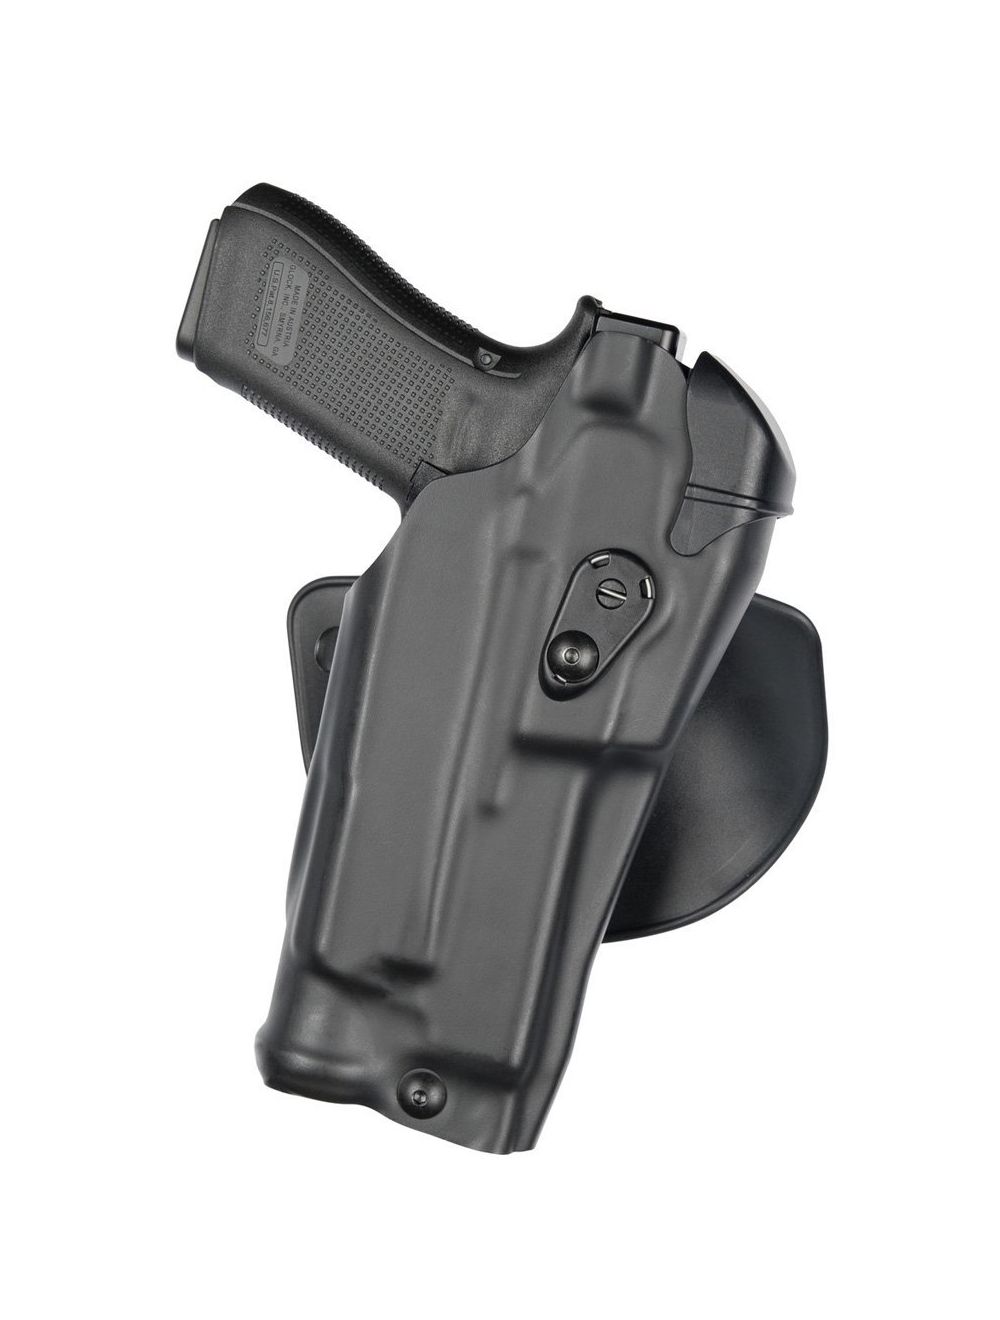 Model 6378RDS ALS Concealment Paddle Holster for Glock 19 MOS w/ Light